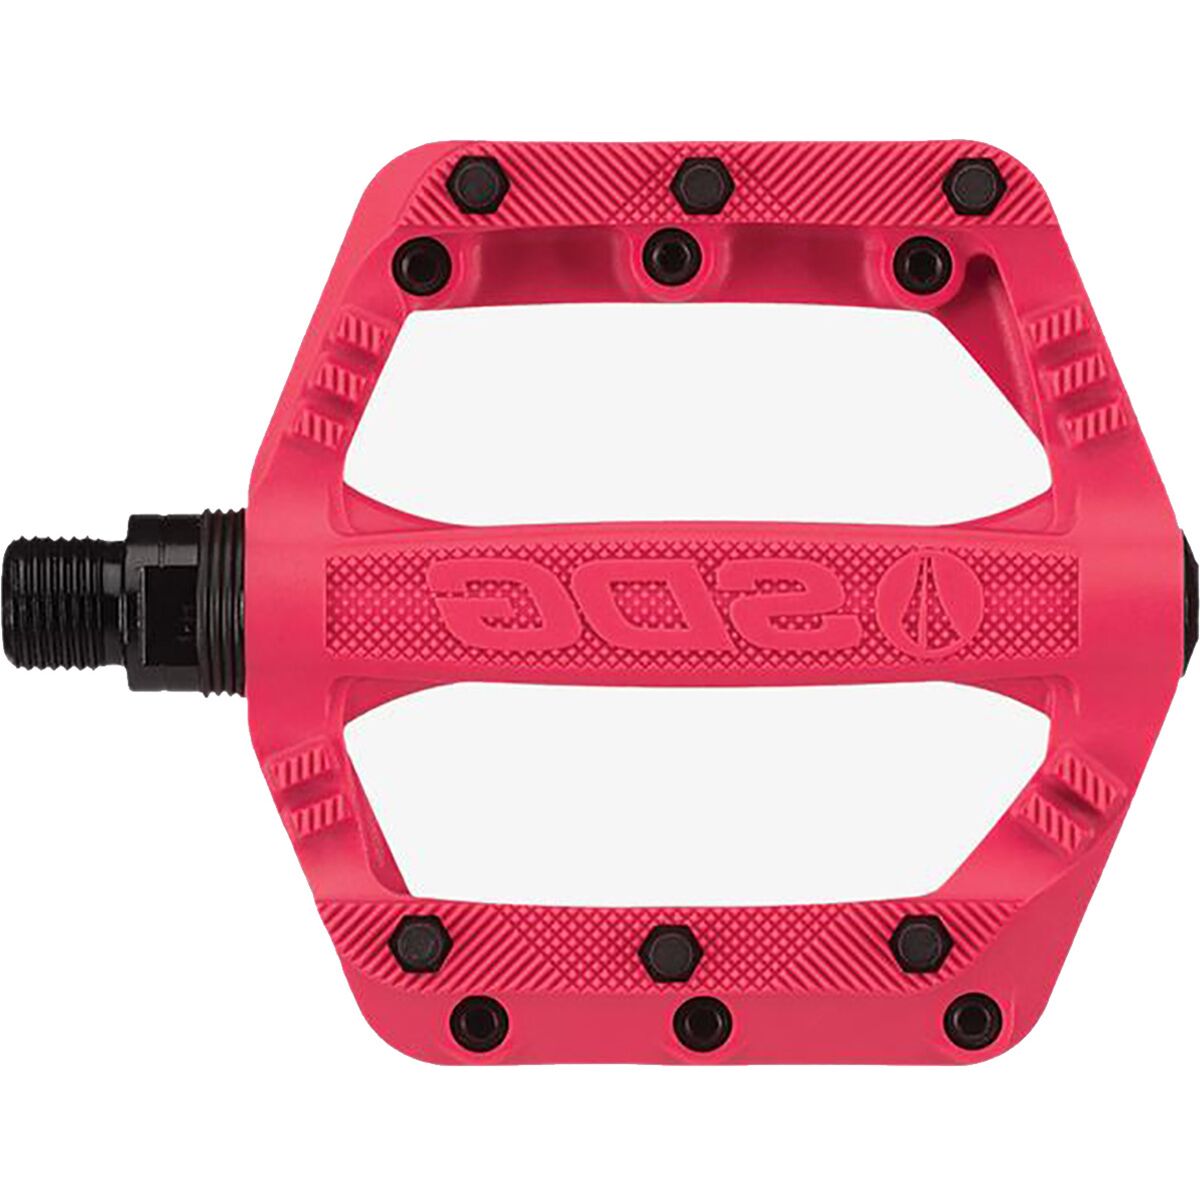 SDG Components Slater Pedals